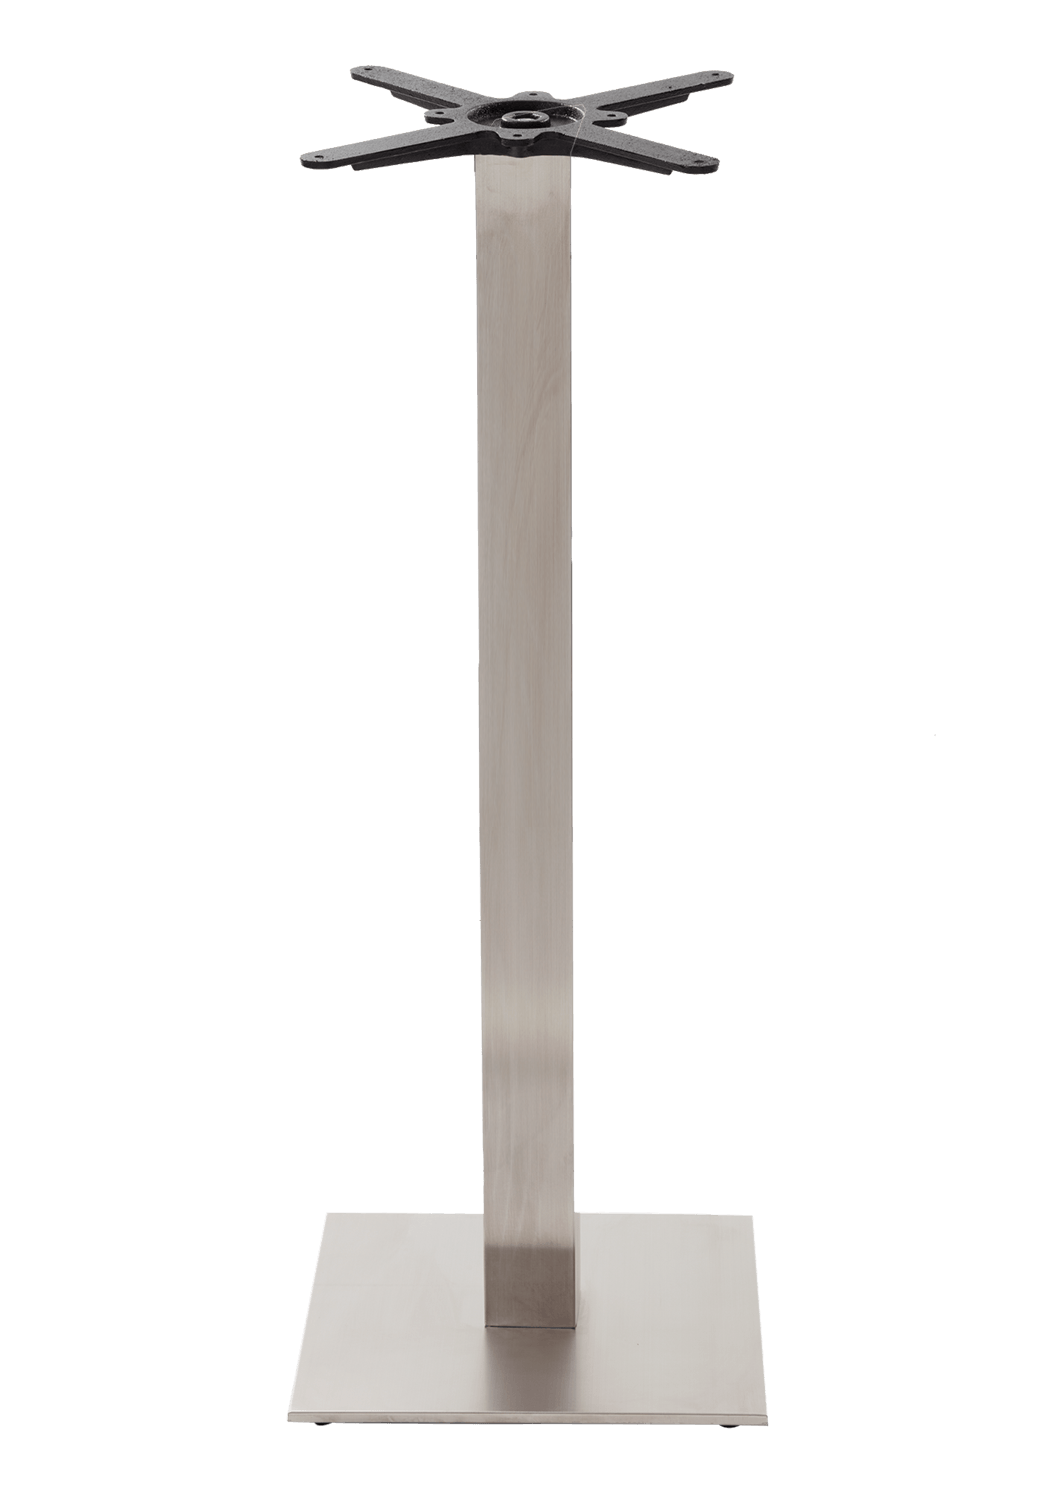 Square stainless steel table base - Medium 1050 mm